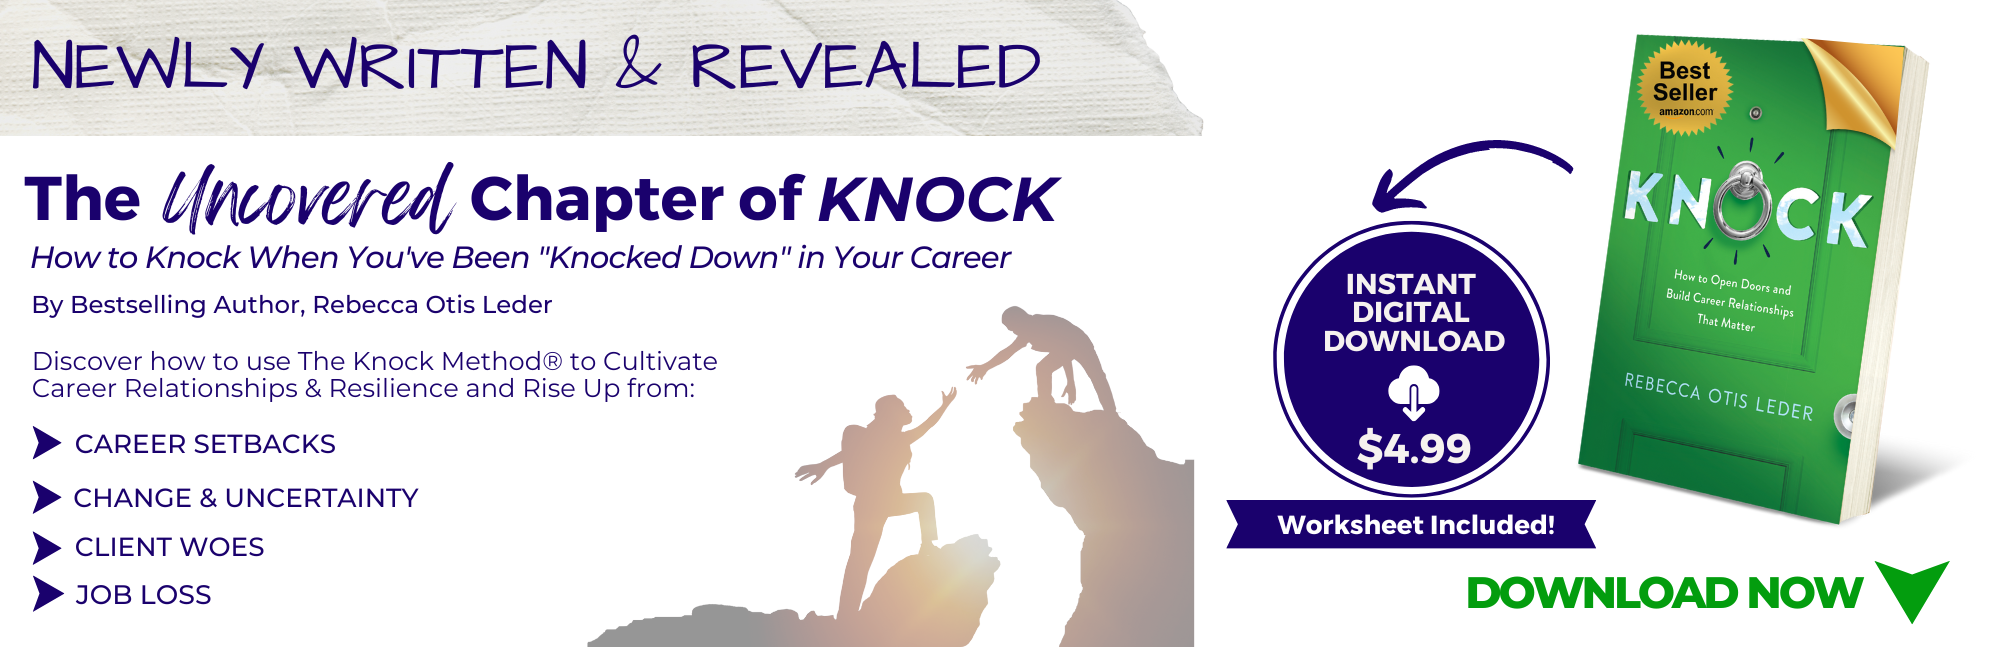 download the new uncovered chapter of the career development bestselling book KNOCK by Rebecca Otis Leder on relationships and resilience